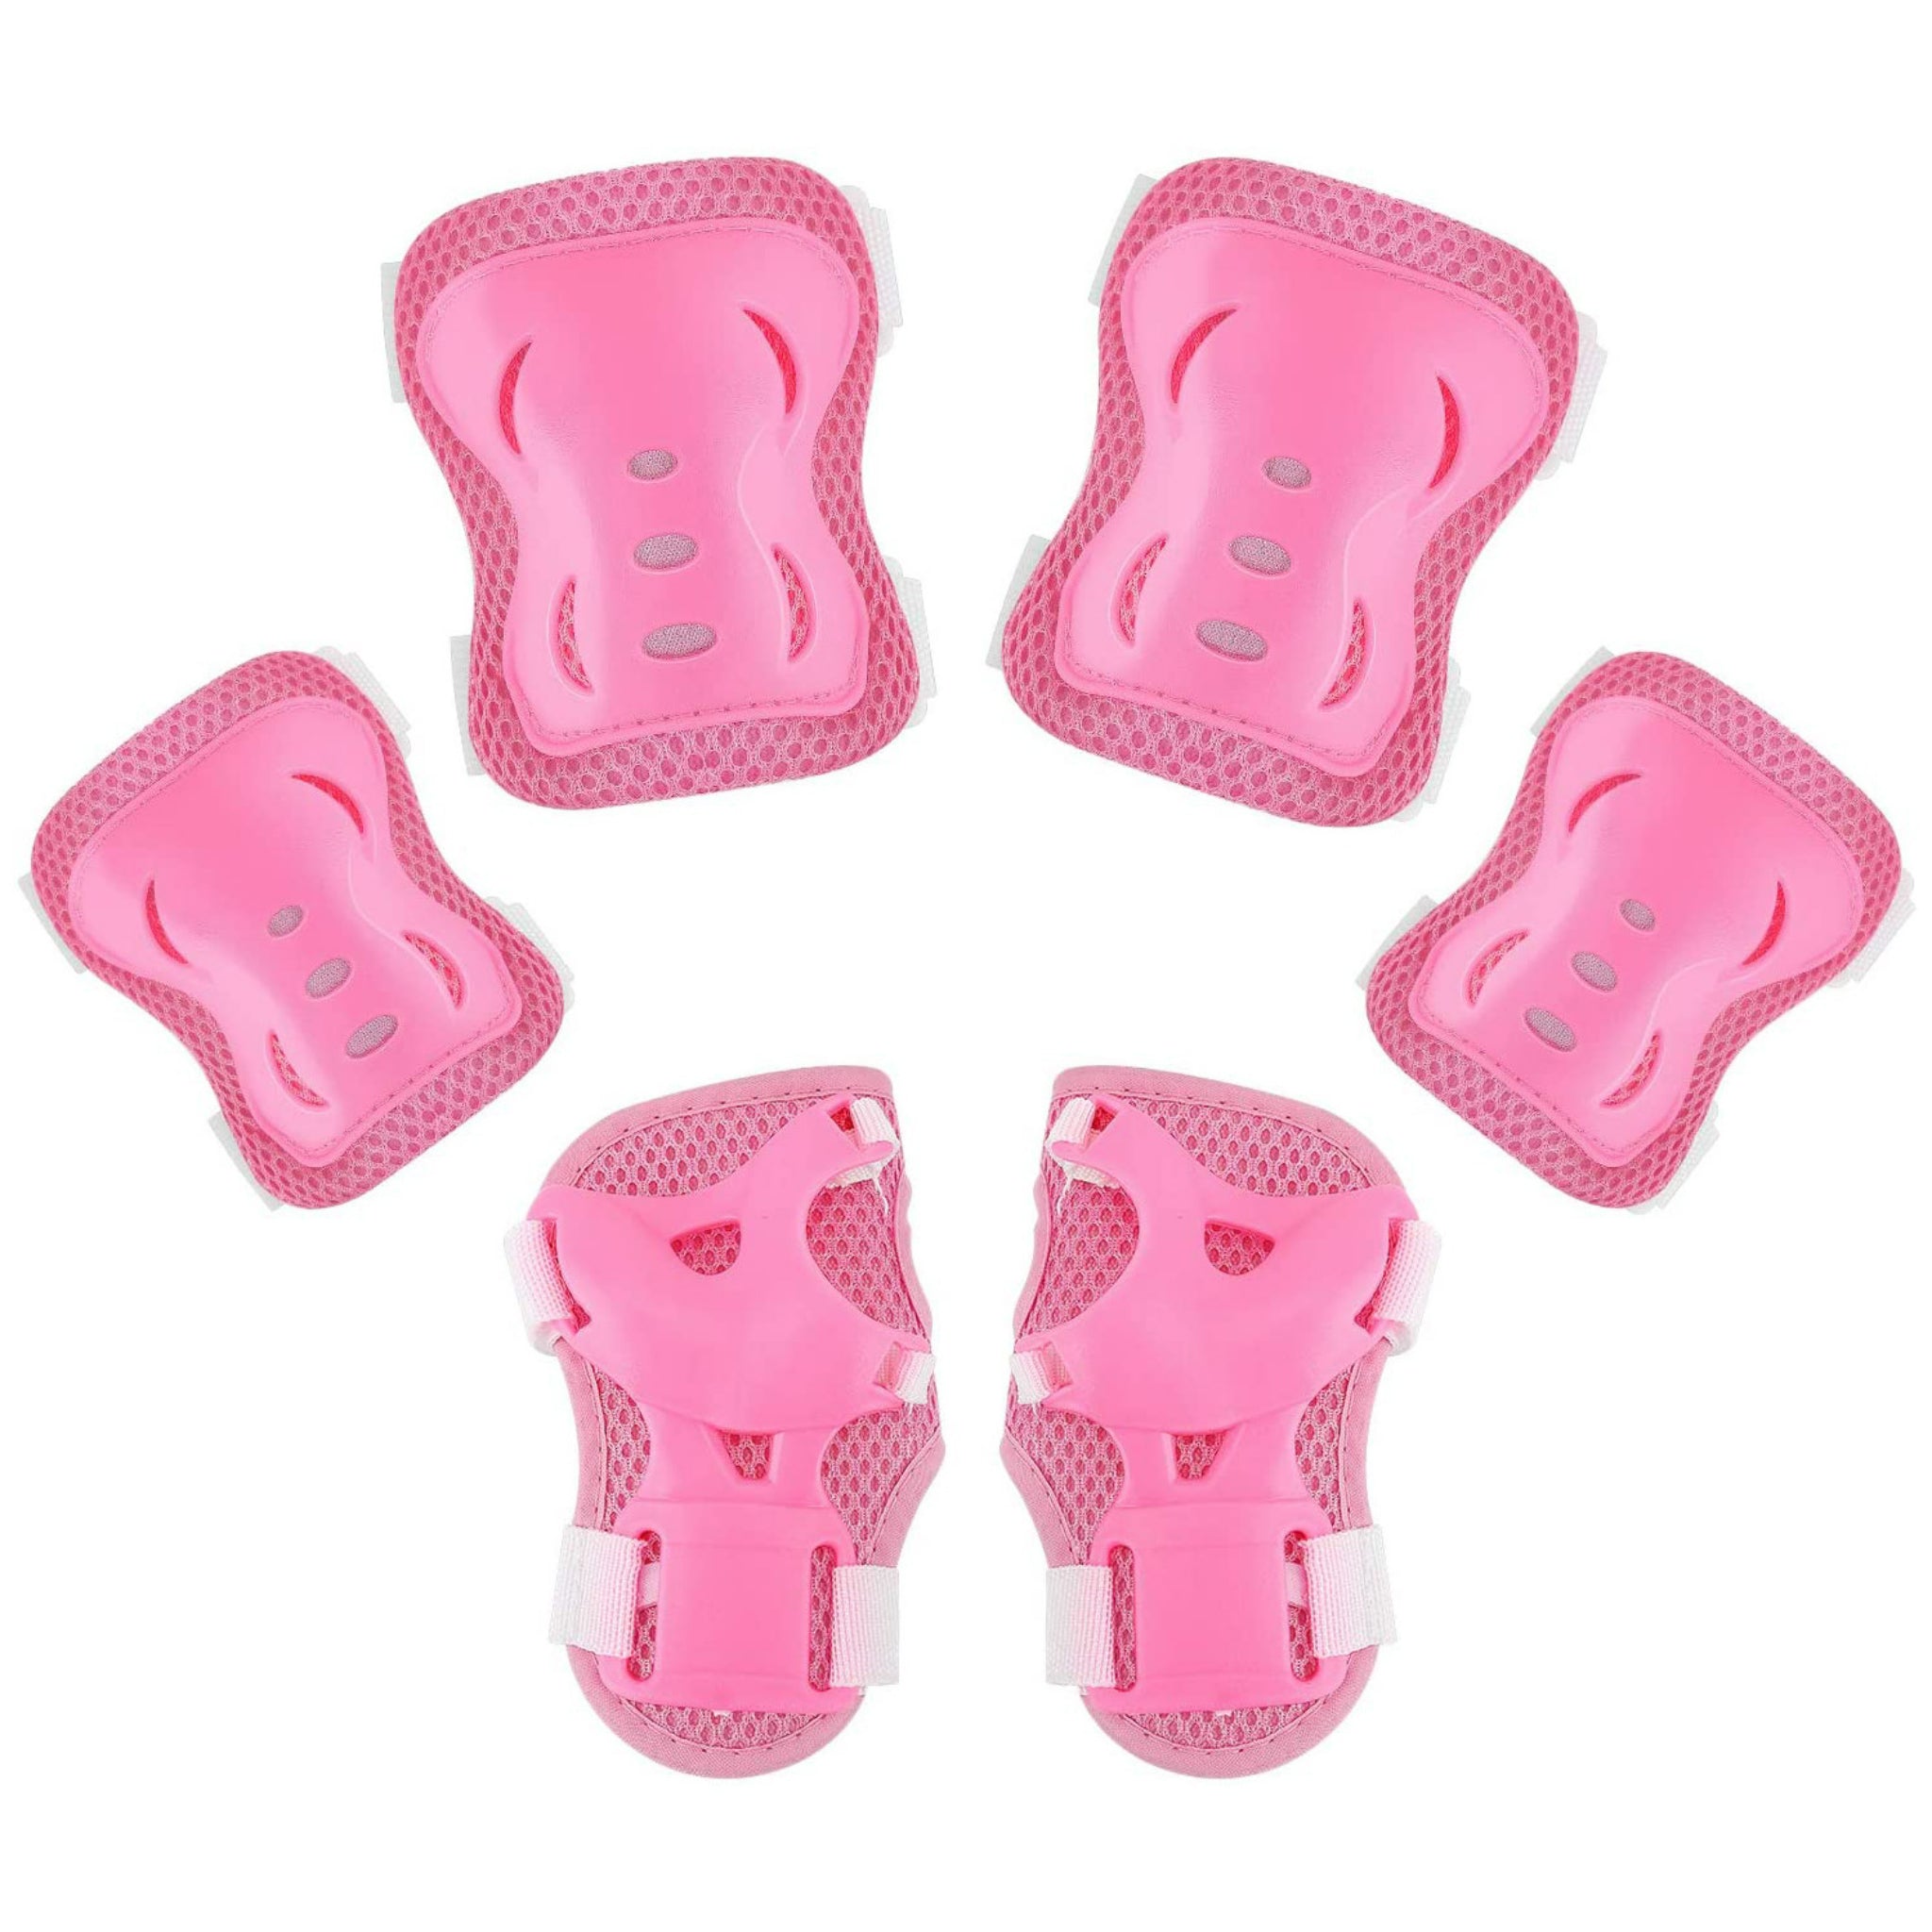 Spartan Knee & Elbow Pads and Wrist Protective Set Pink XS Default Title